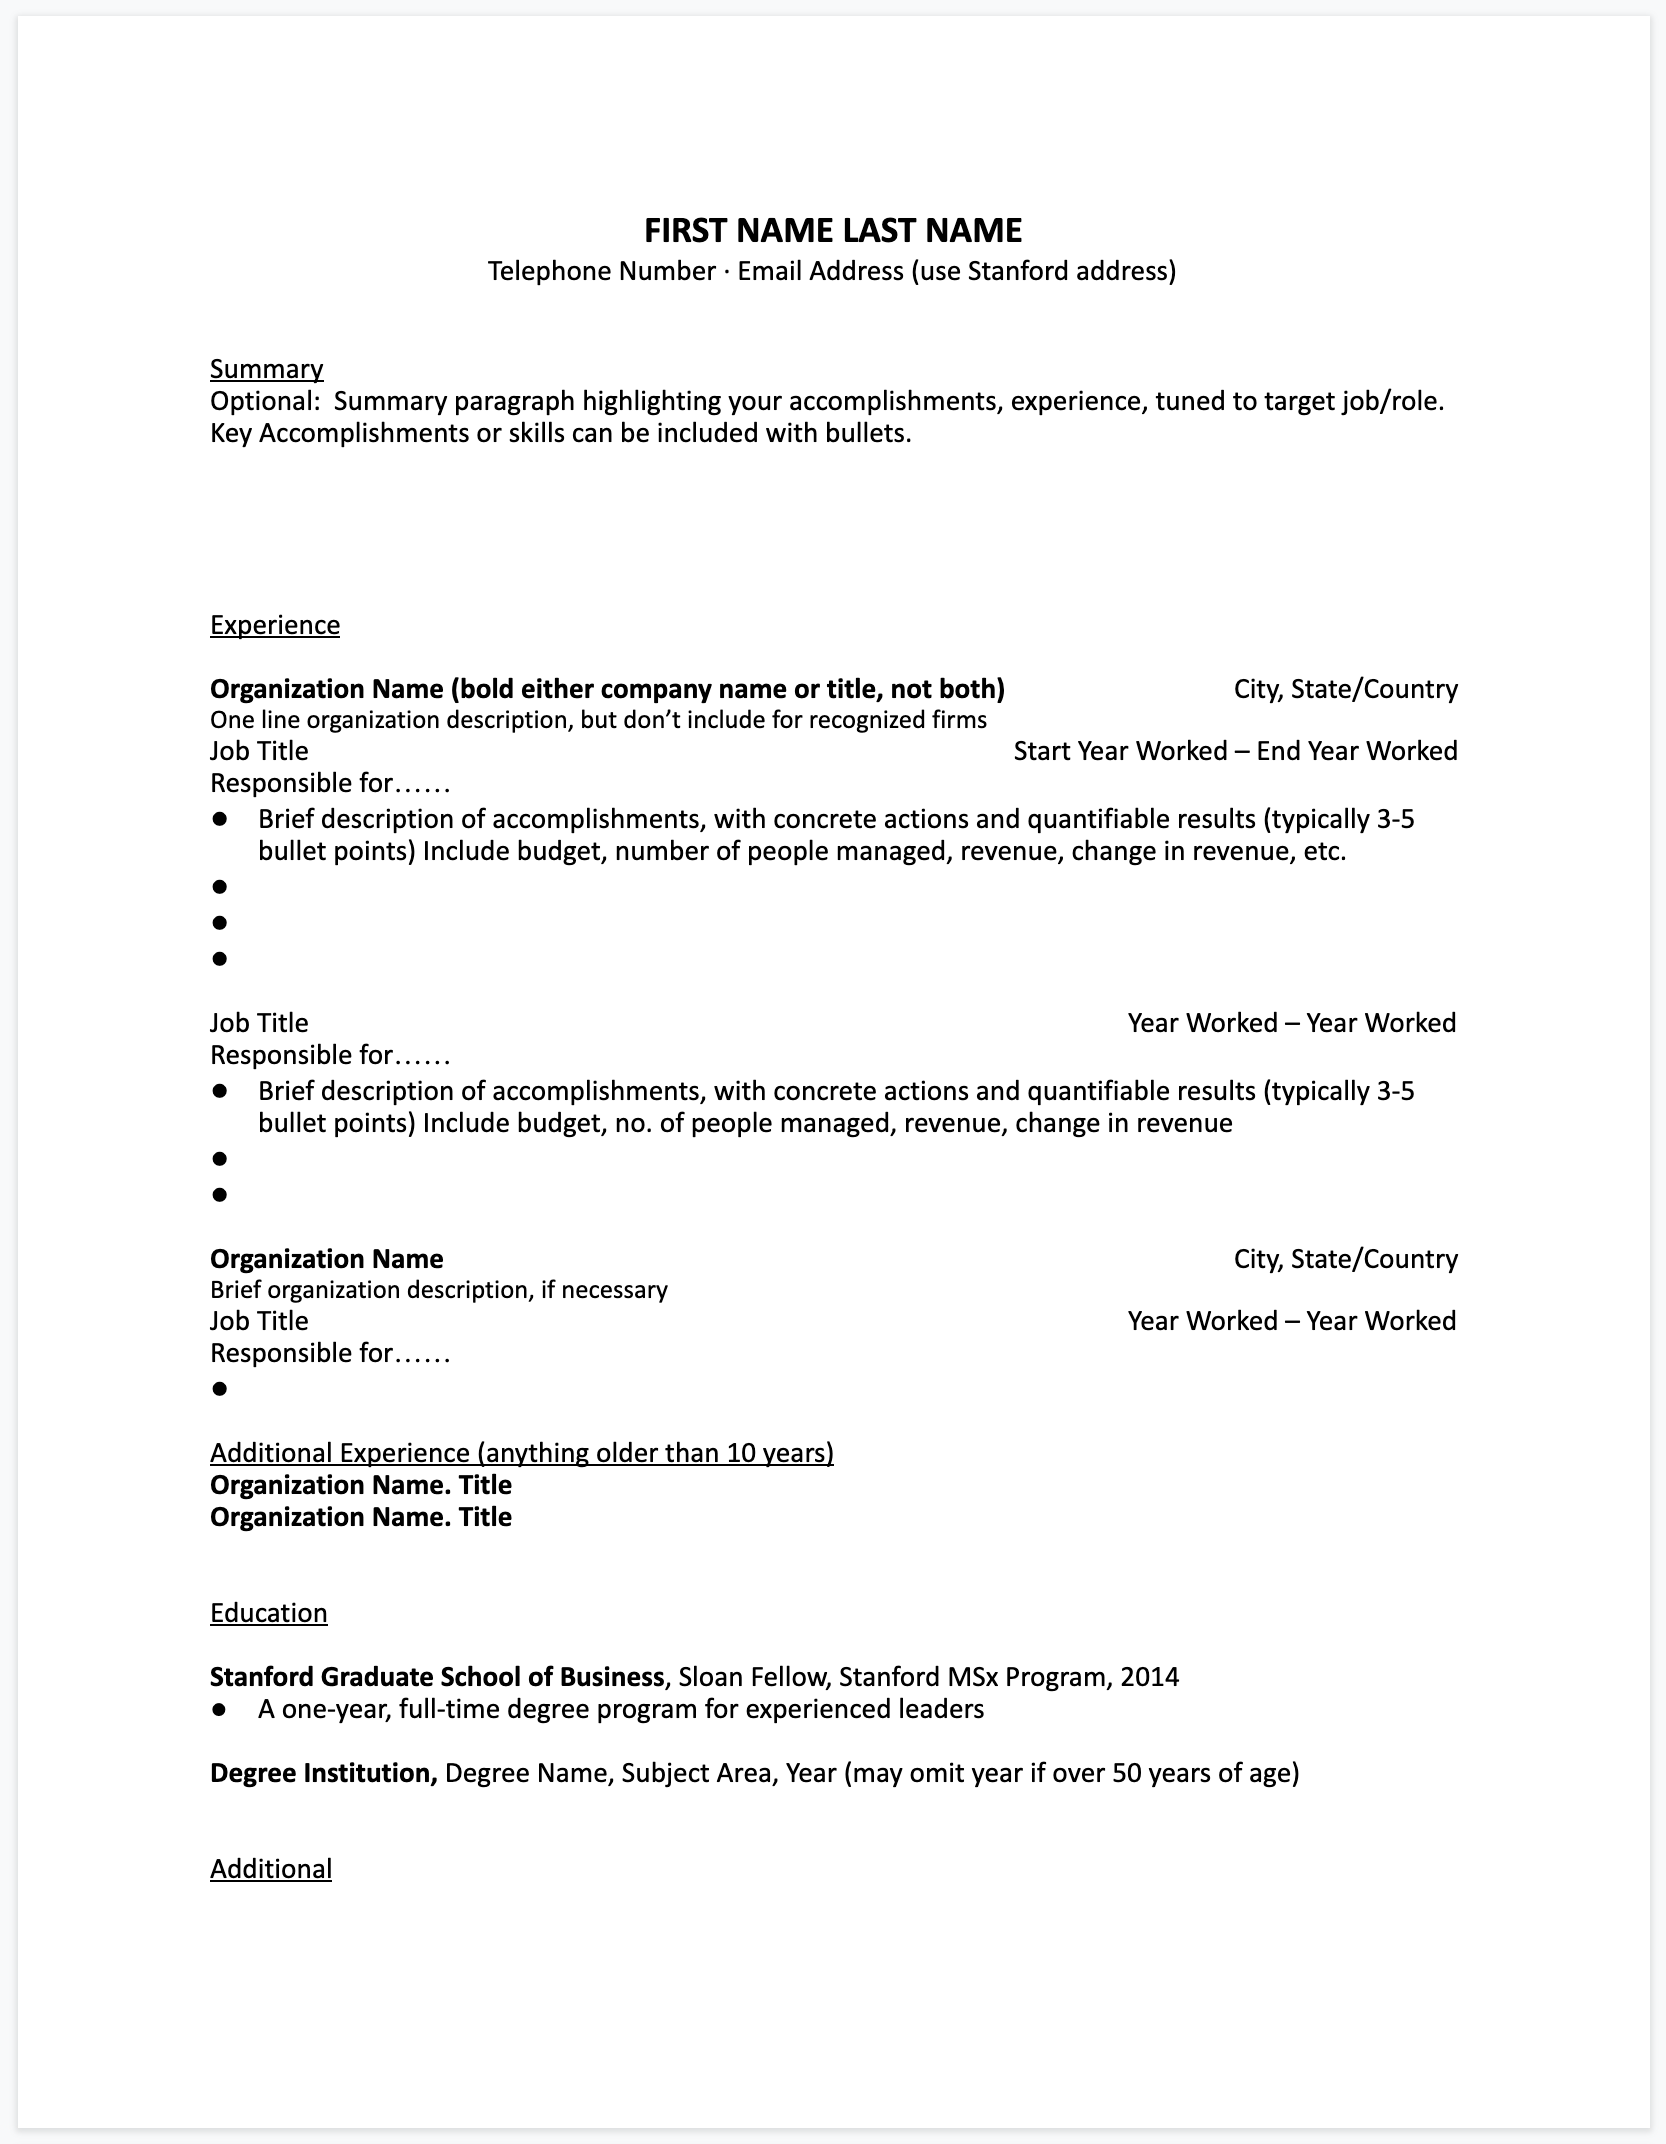 4-free-cv-templates-used-by-harvard-and-mckinsey-tips-for-danish-cv